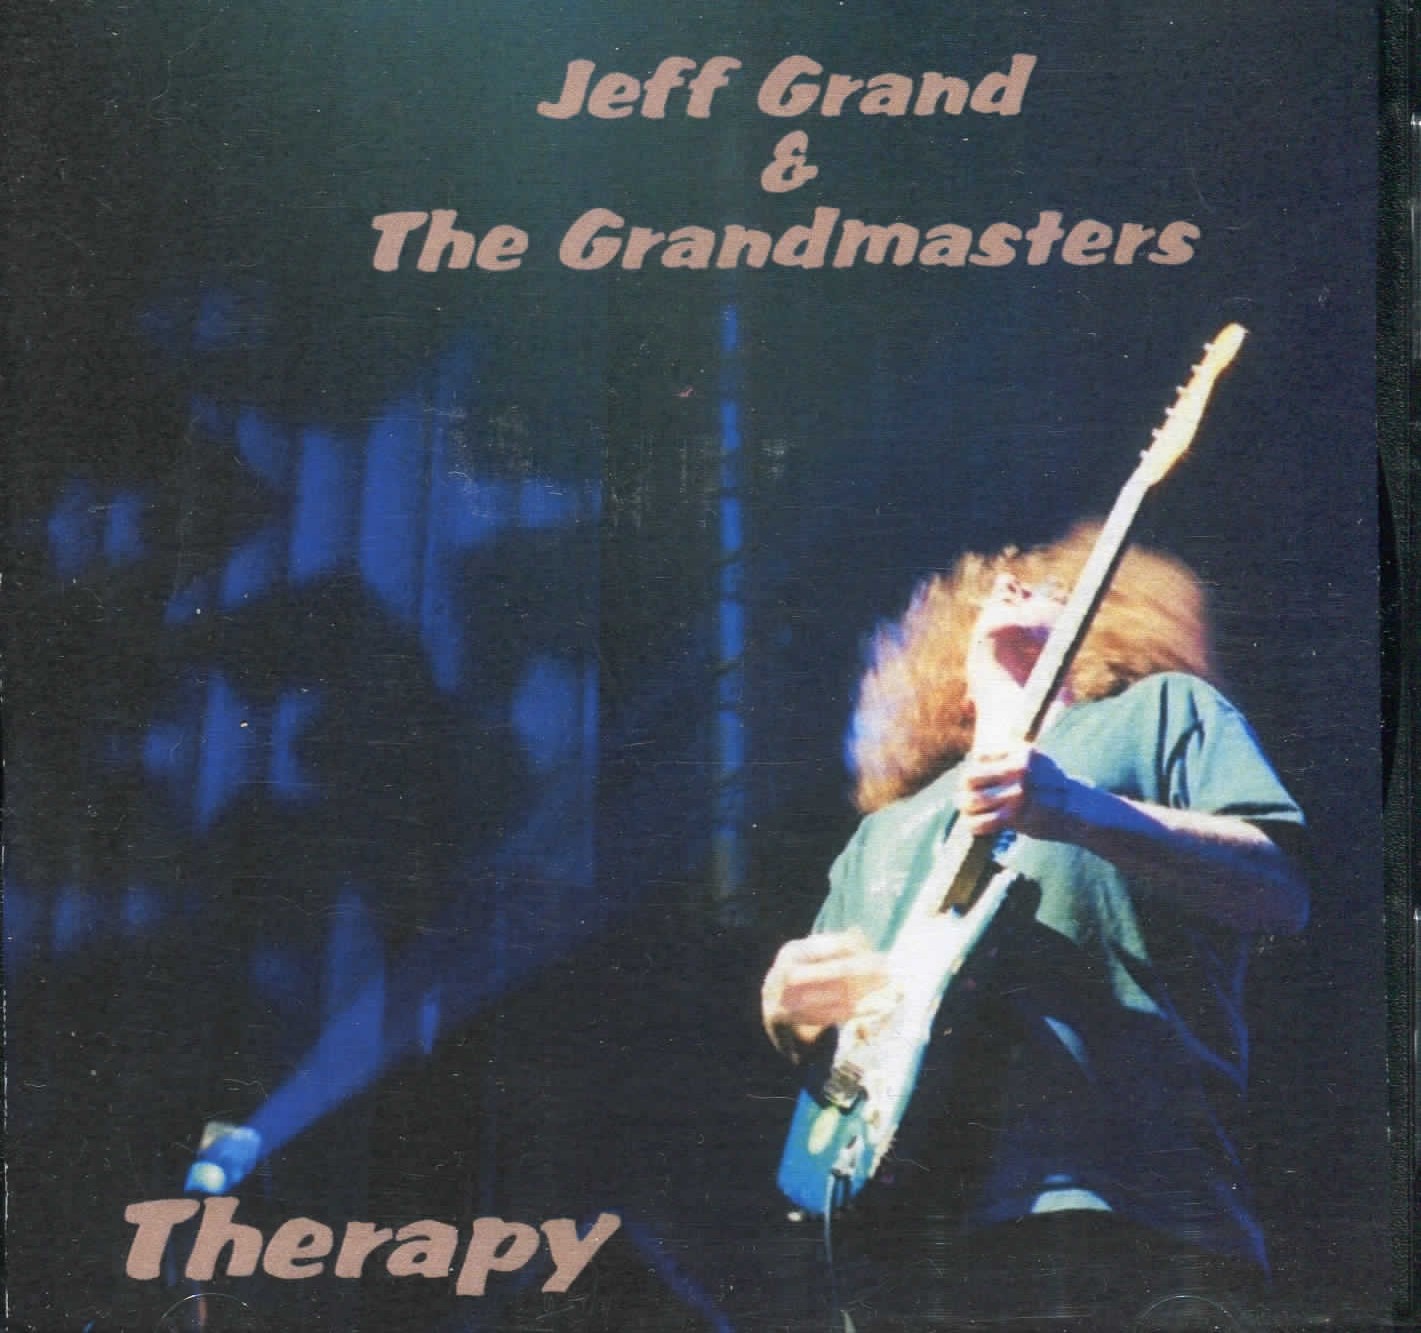 Front Cover for "Therapy" CD